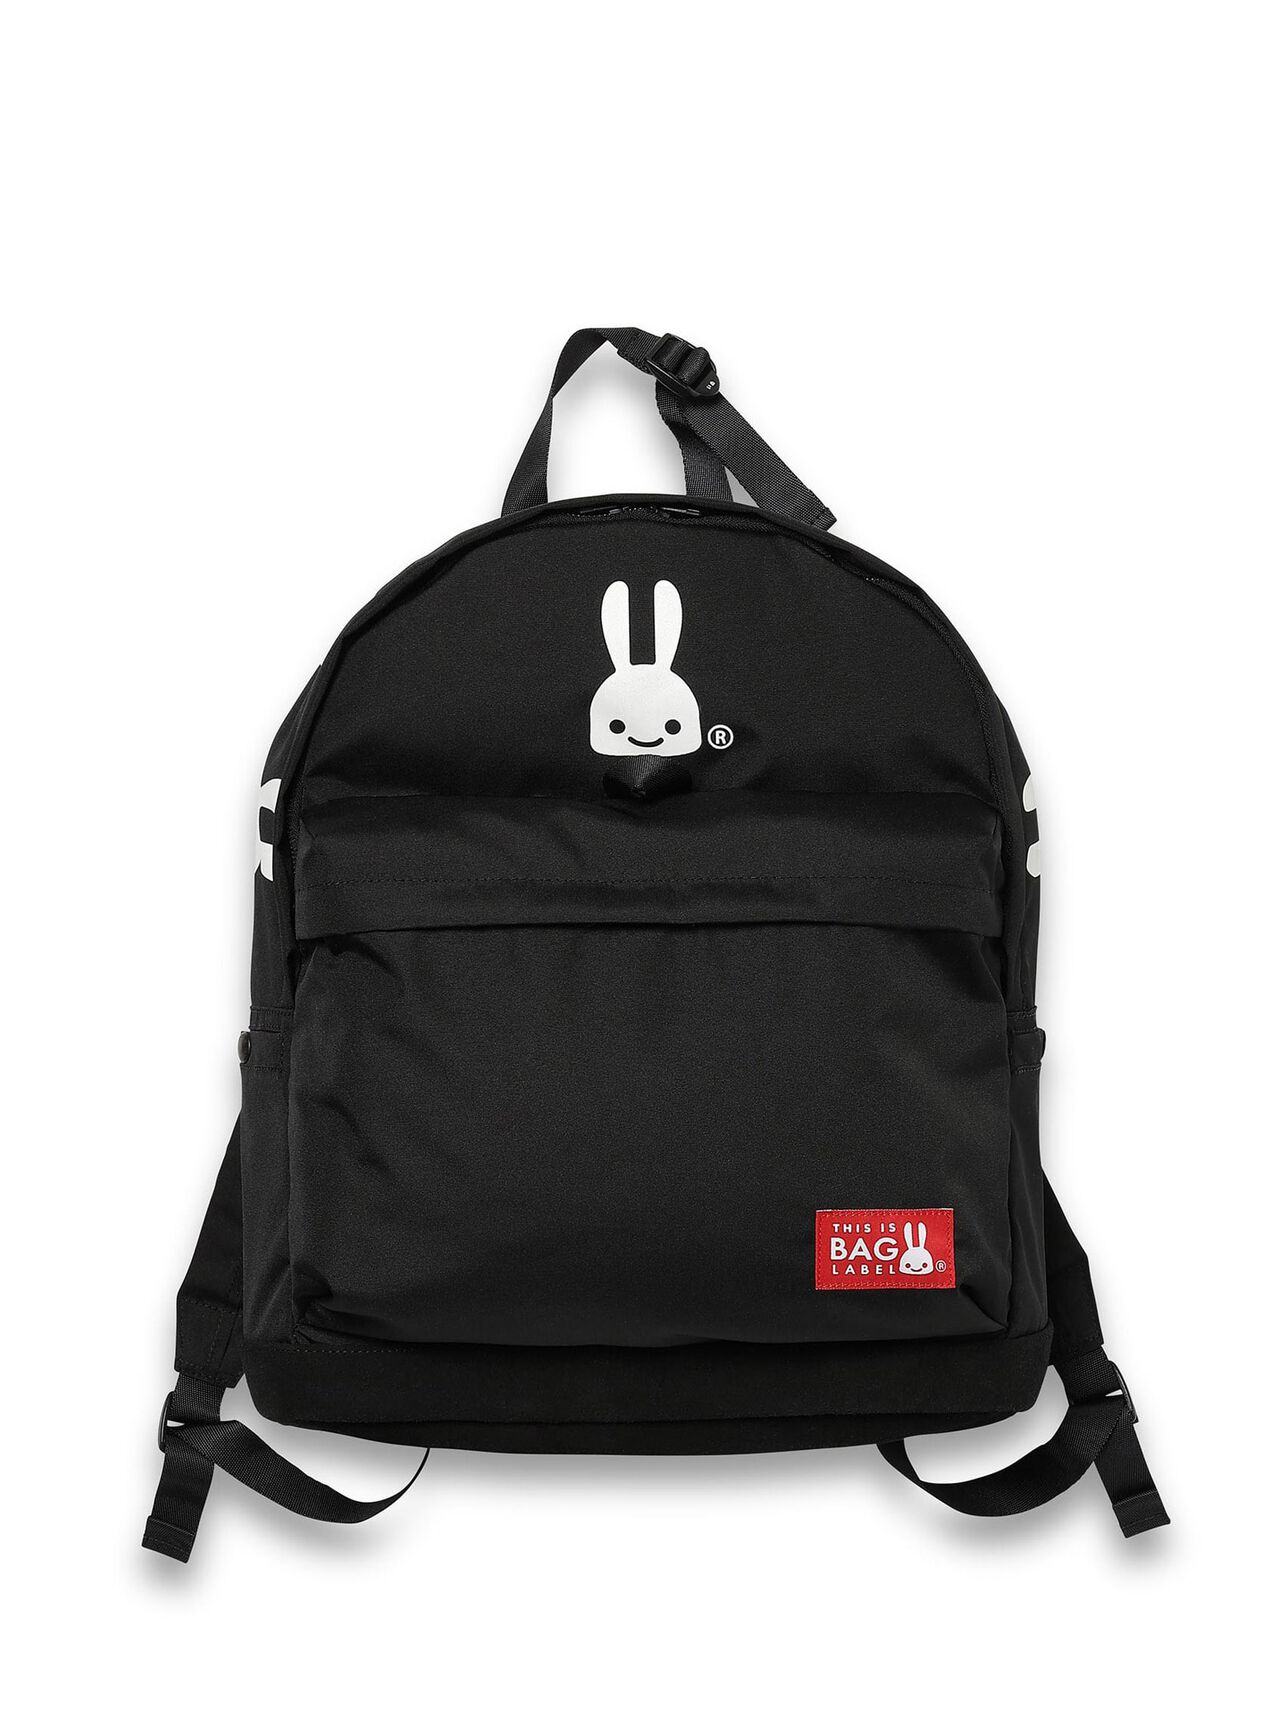 CUNE backpack L in Cordura R with leather bottom,ONE, large image number 0